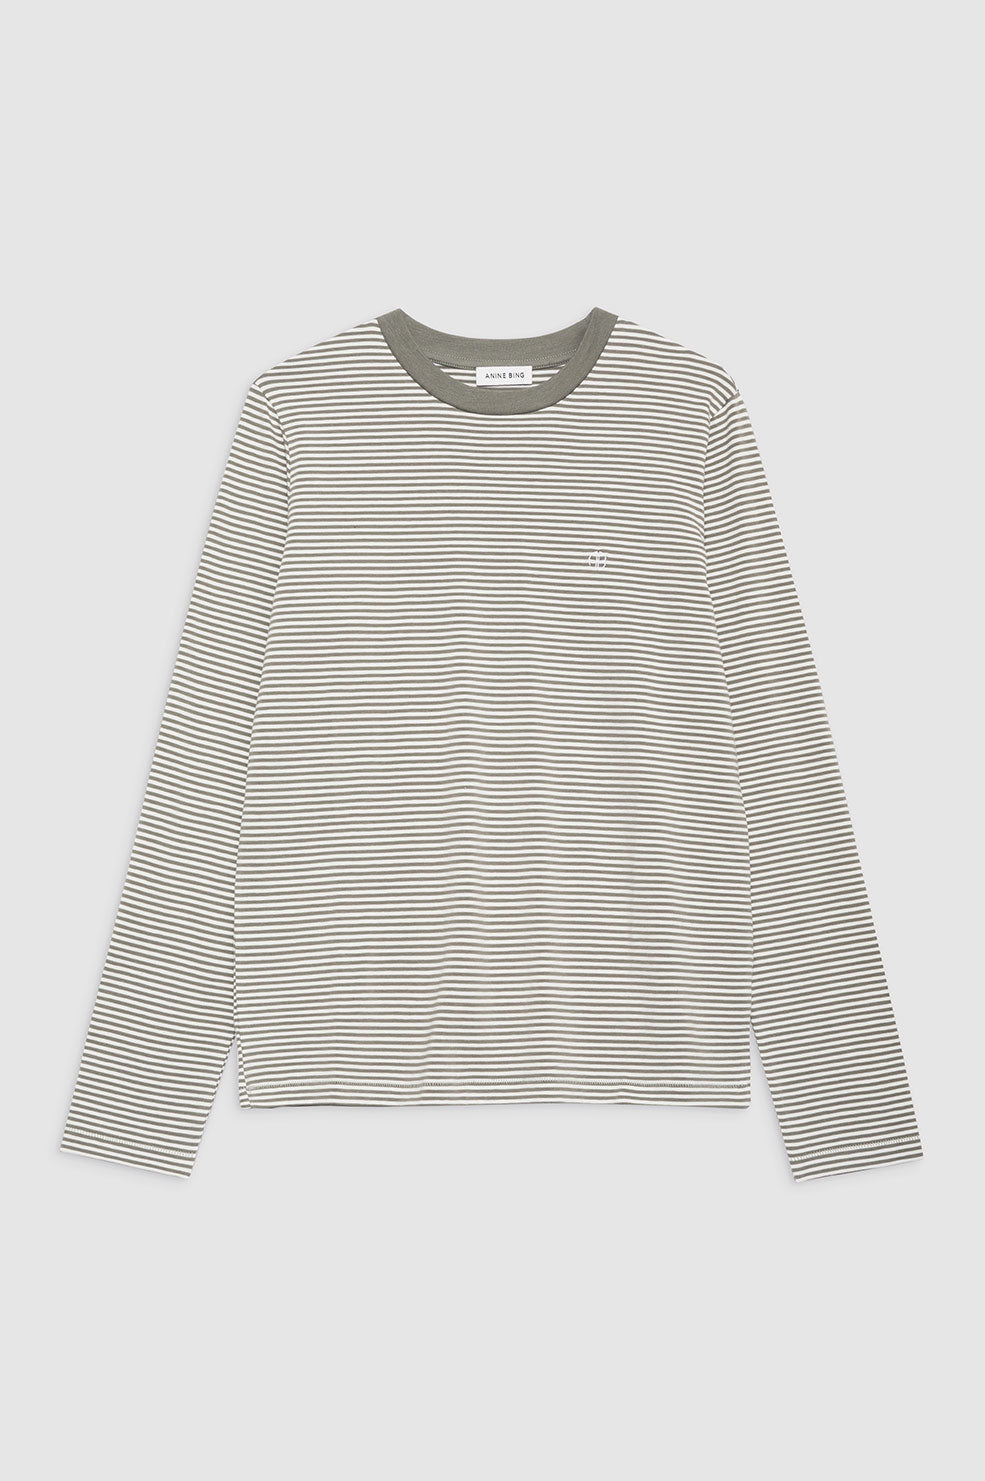 ANINE BING Rylan Tee - Olive And Ivory Stripe - Front View